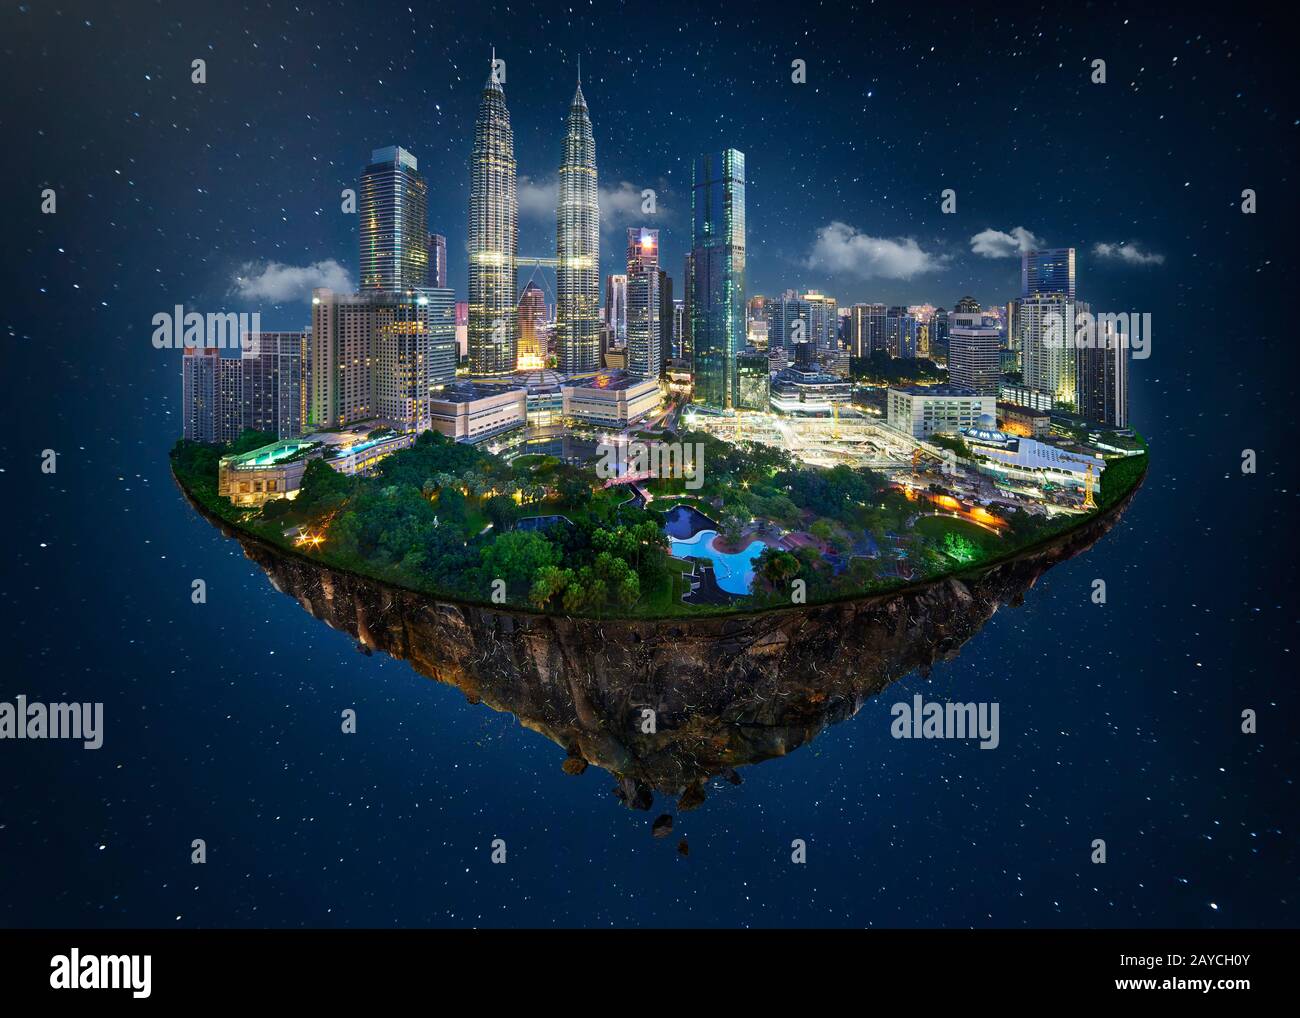 Fantasy island floating in the air with modern city skyline and lake garden Stock Photo